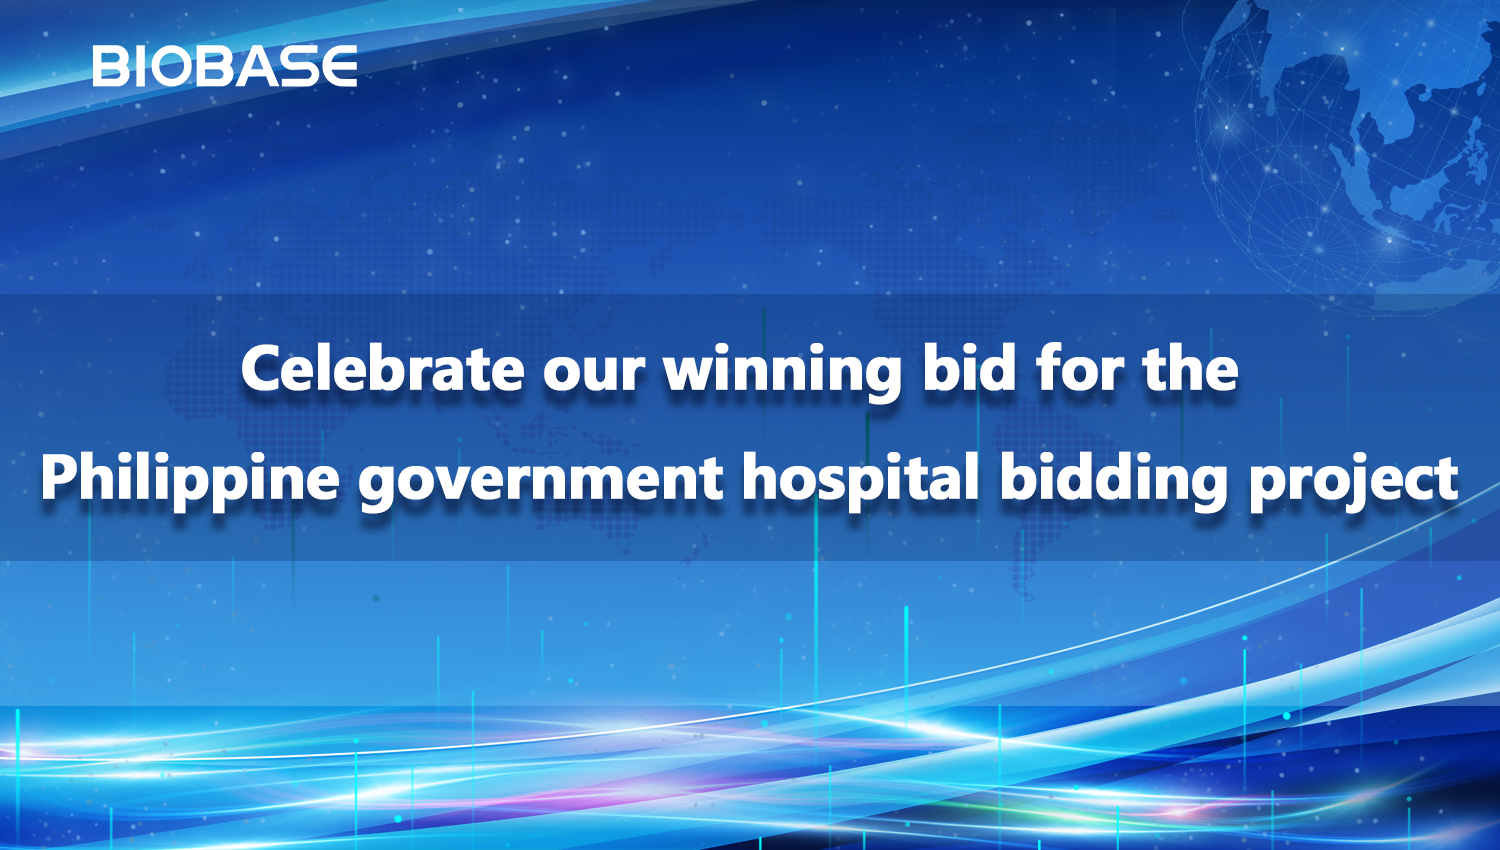 Celebrate our winning bid for the Philippine government hospital bidding project